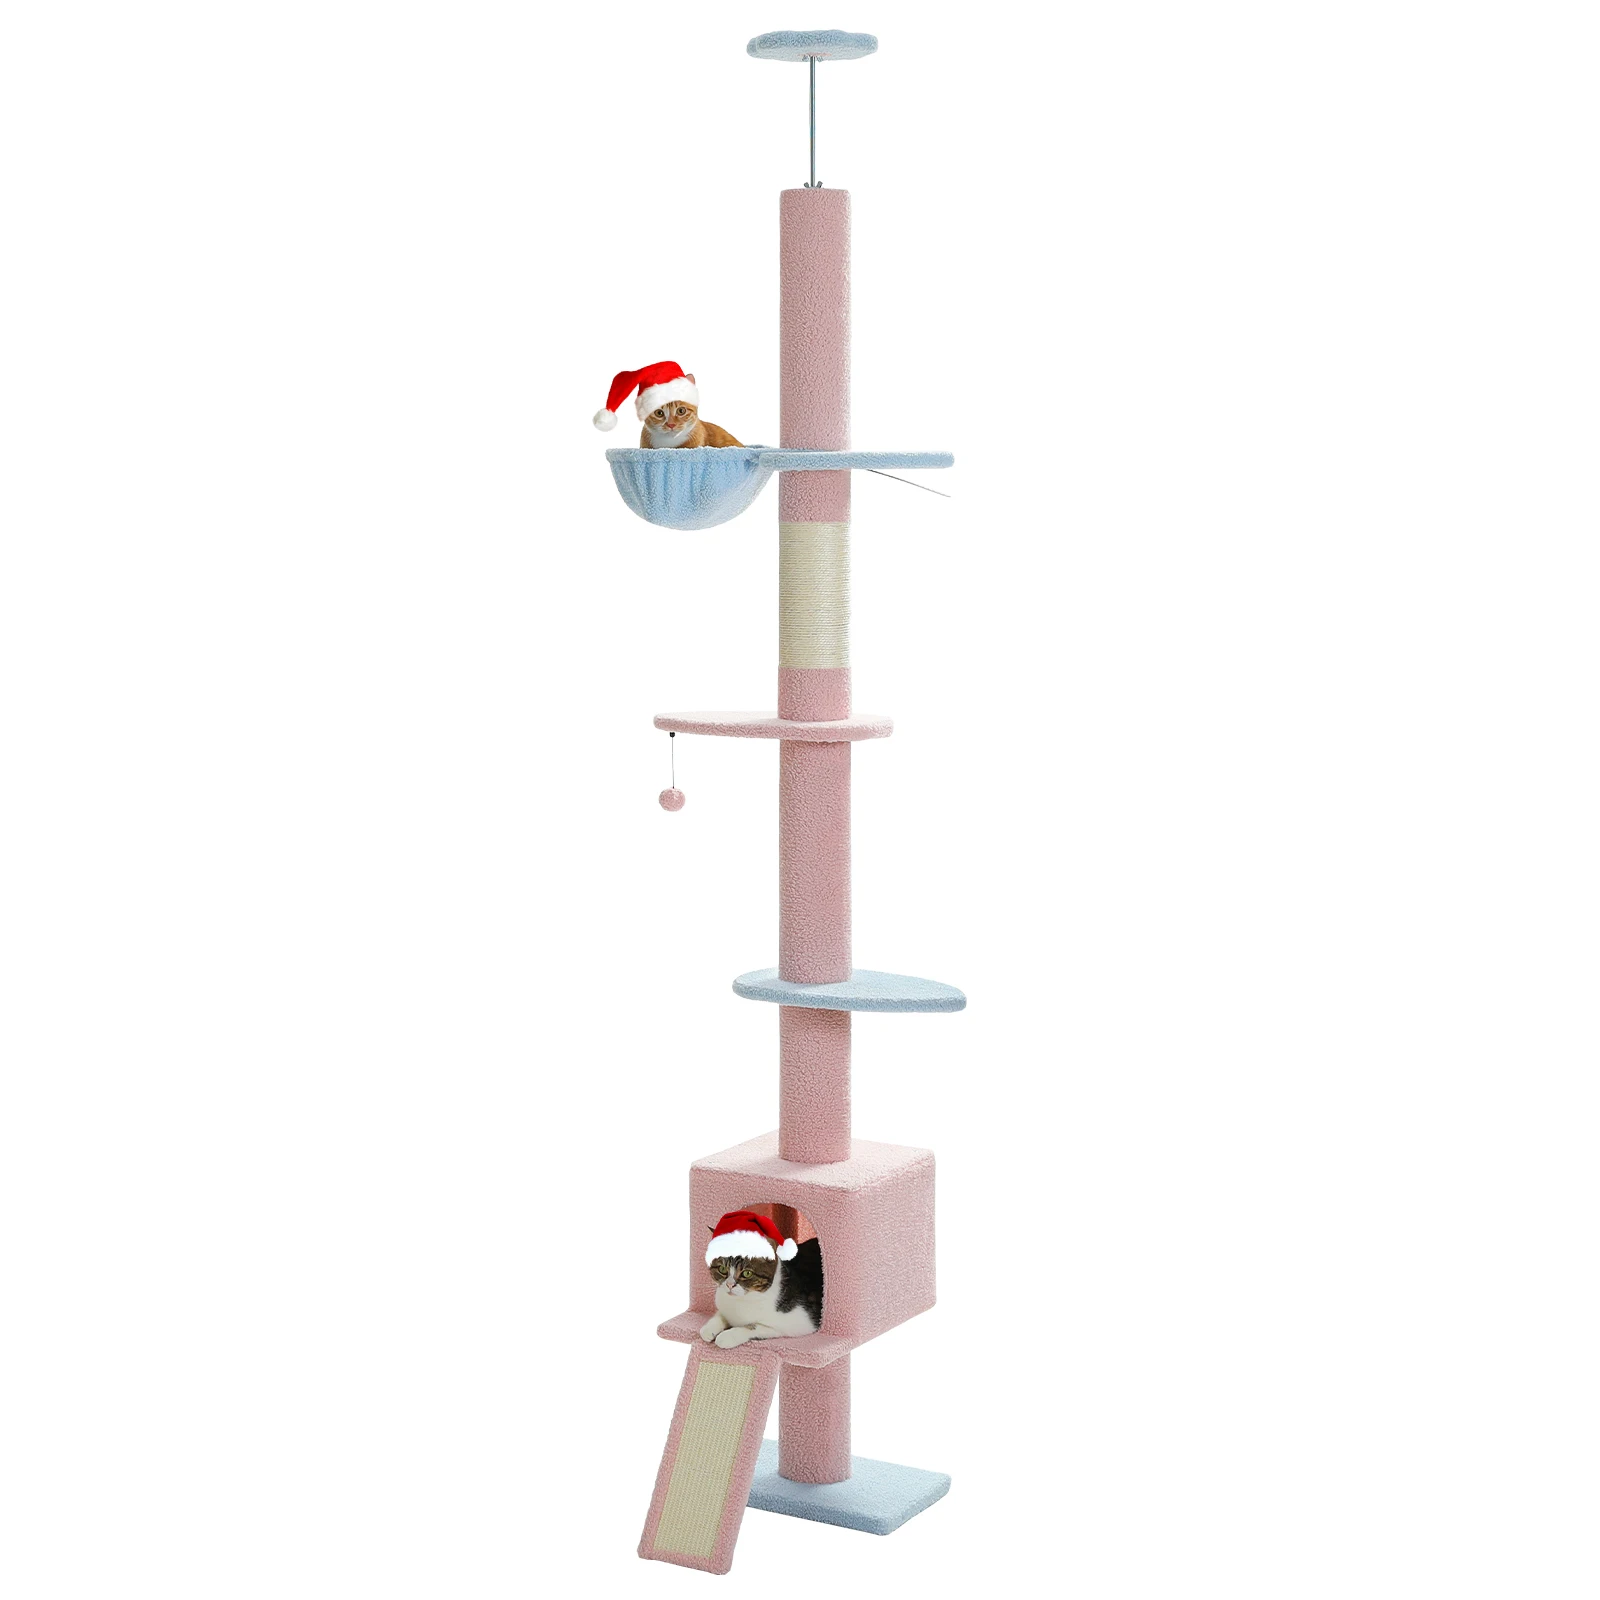 

5 Tiers Floor to Ceiling Cat Tree Tower Climbing Tree Adjustable Height for Indoor Cats with Condo Scratching Post Ladders